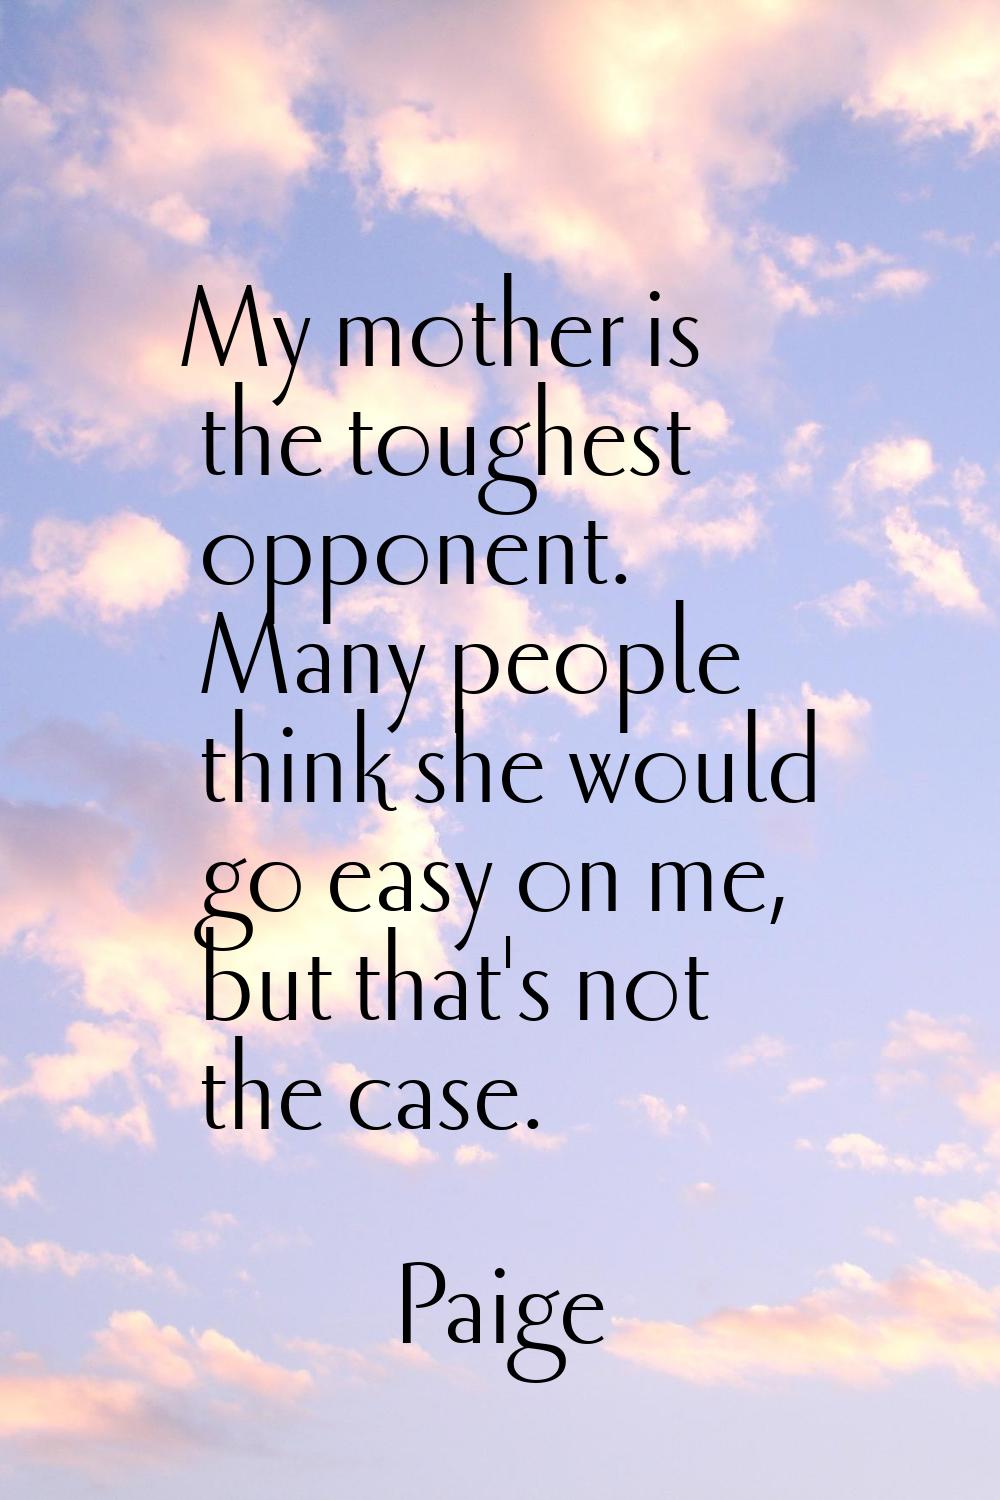 My mother is the toughest opponent. Many people think she would go easy on me, but that's not the c